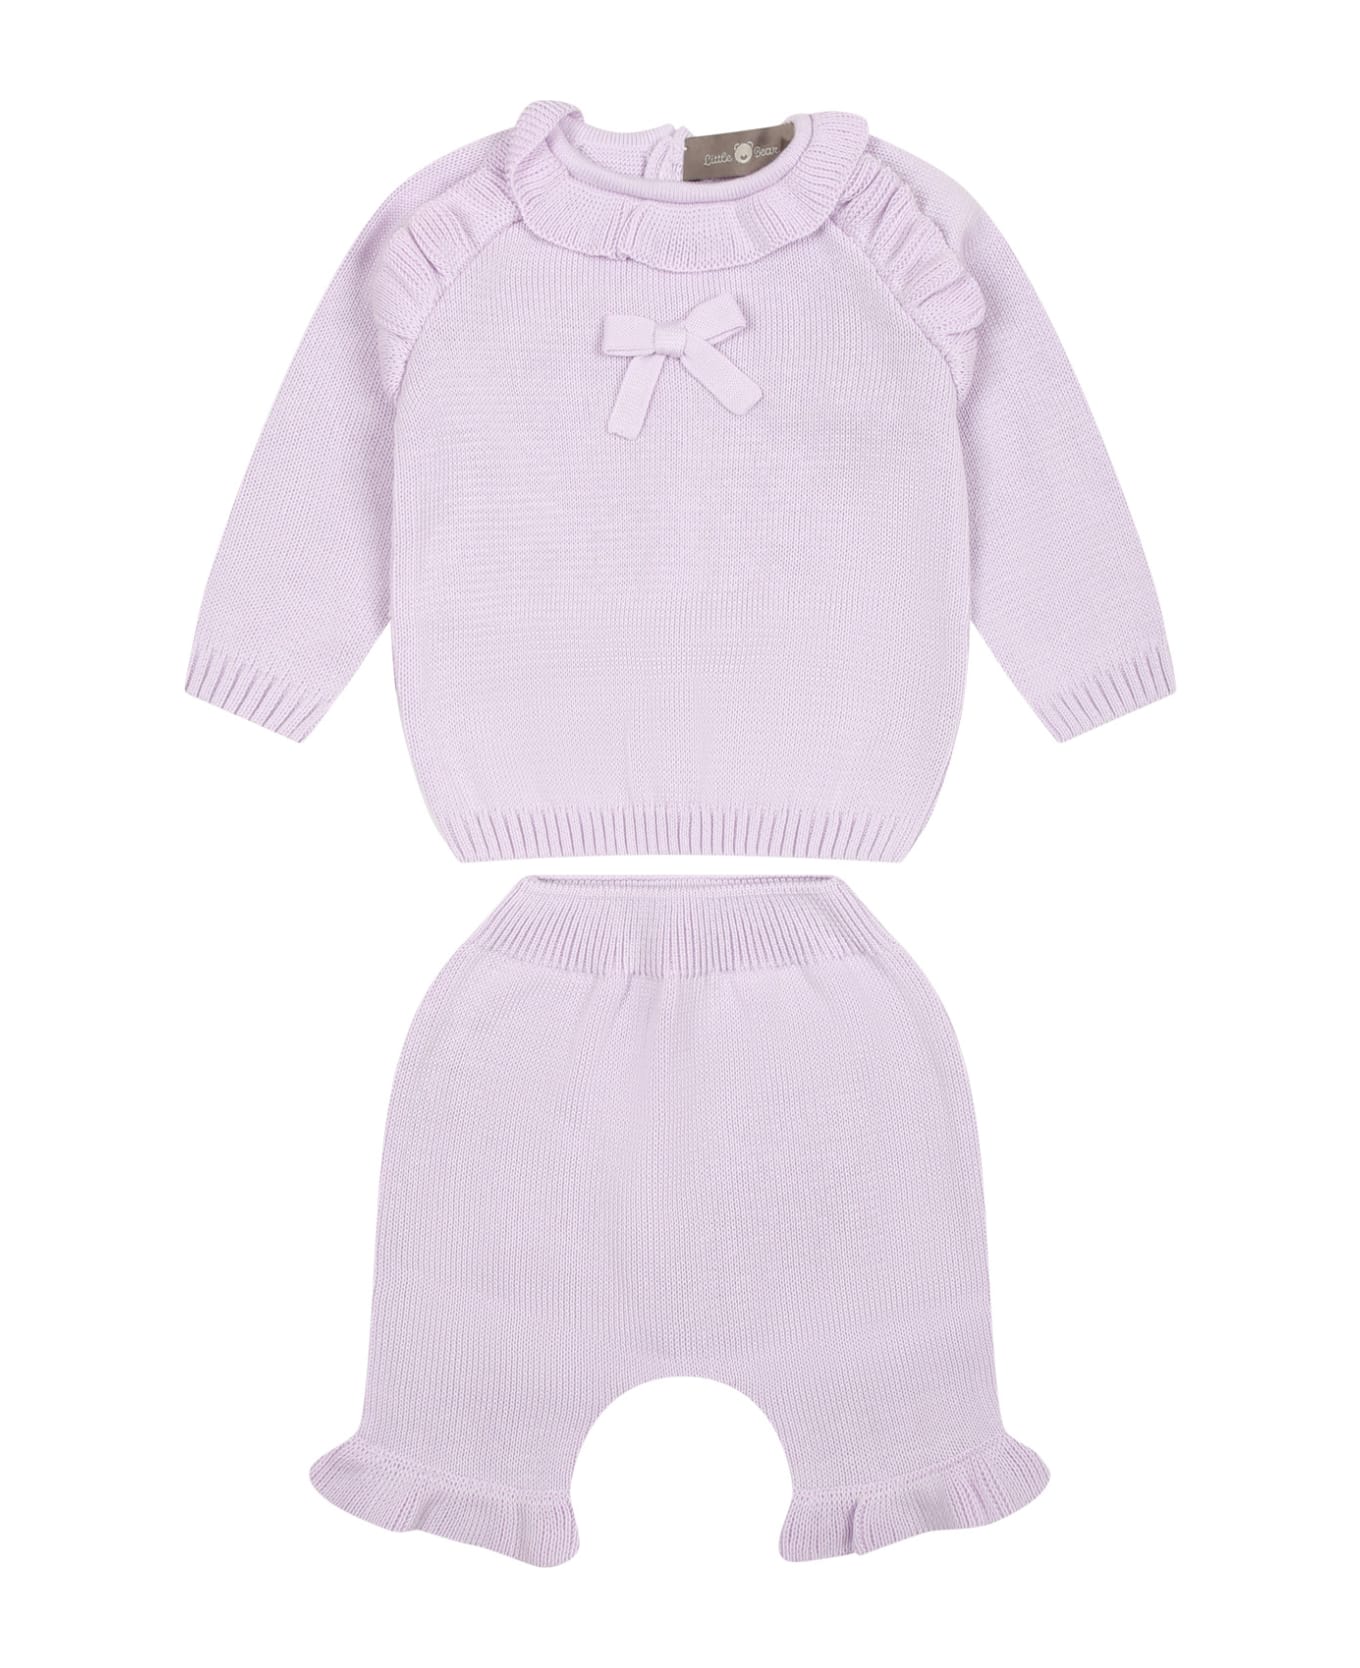 Little Bear Wisteria Birth Suit For Baby Girl - Violet ボディスーツ＆セットアップ